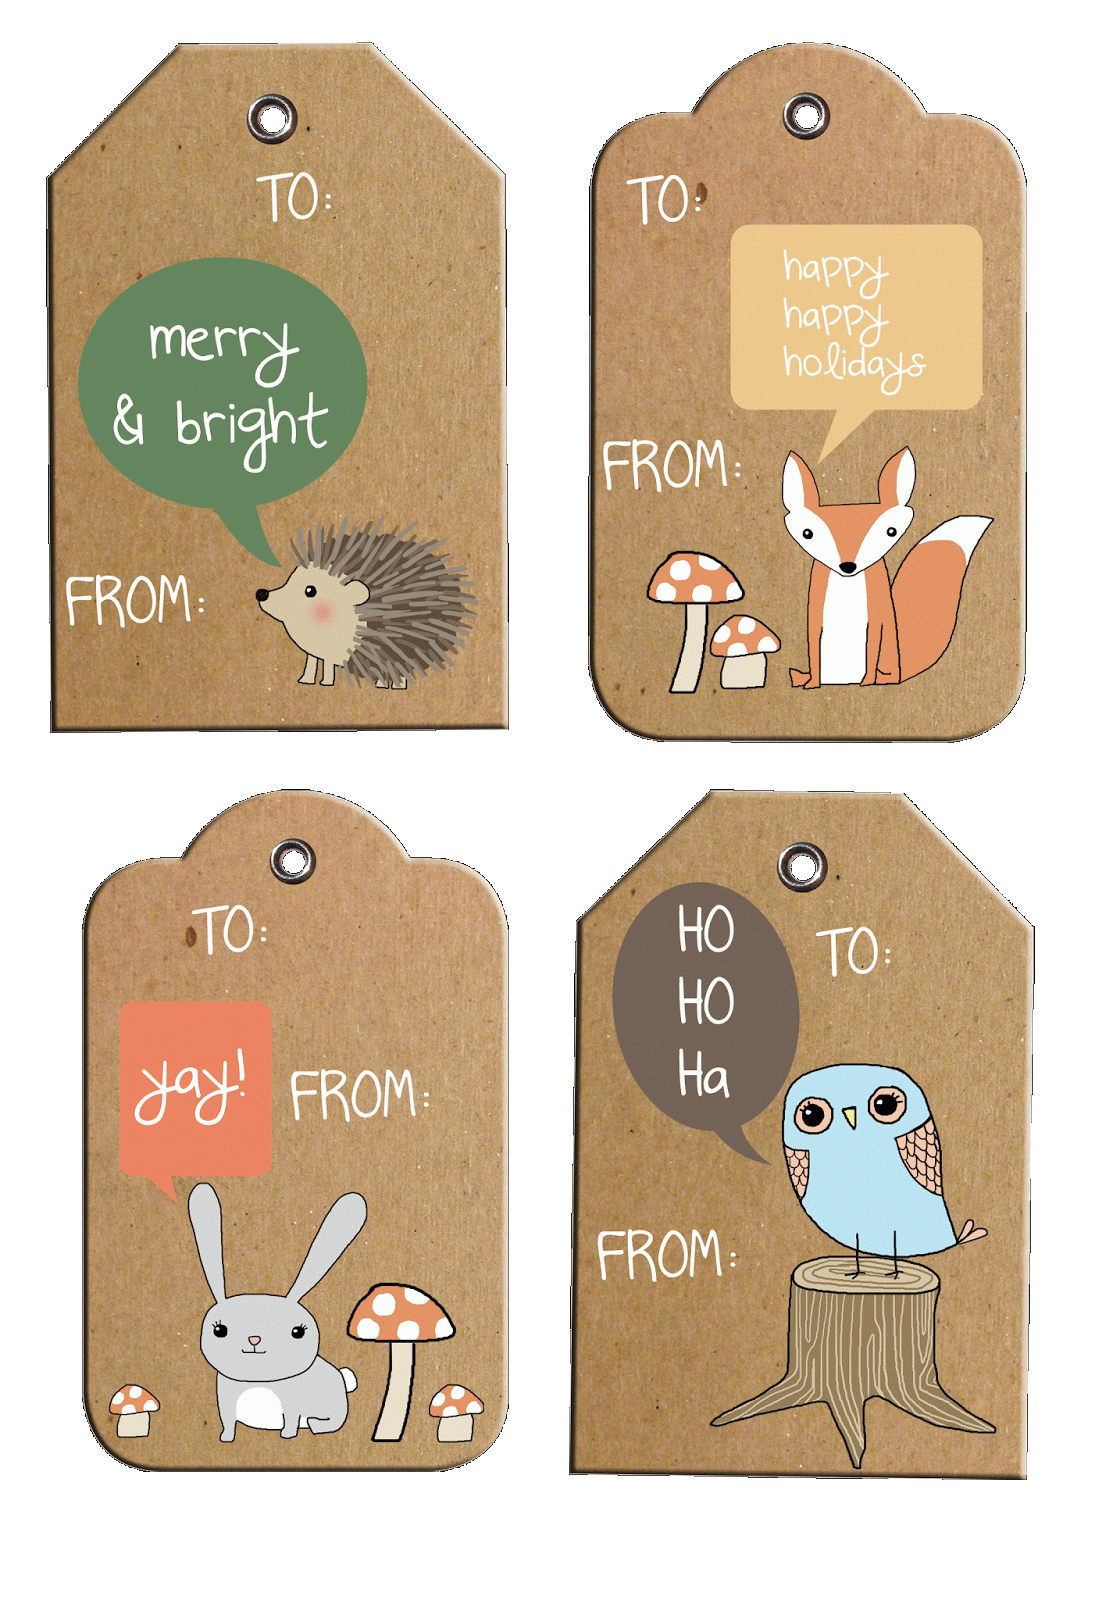 ashley-thunder-events-rustic-woodland-holiday-gift-tags-free